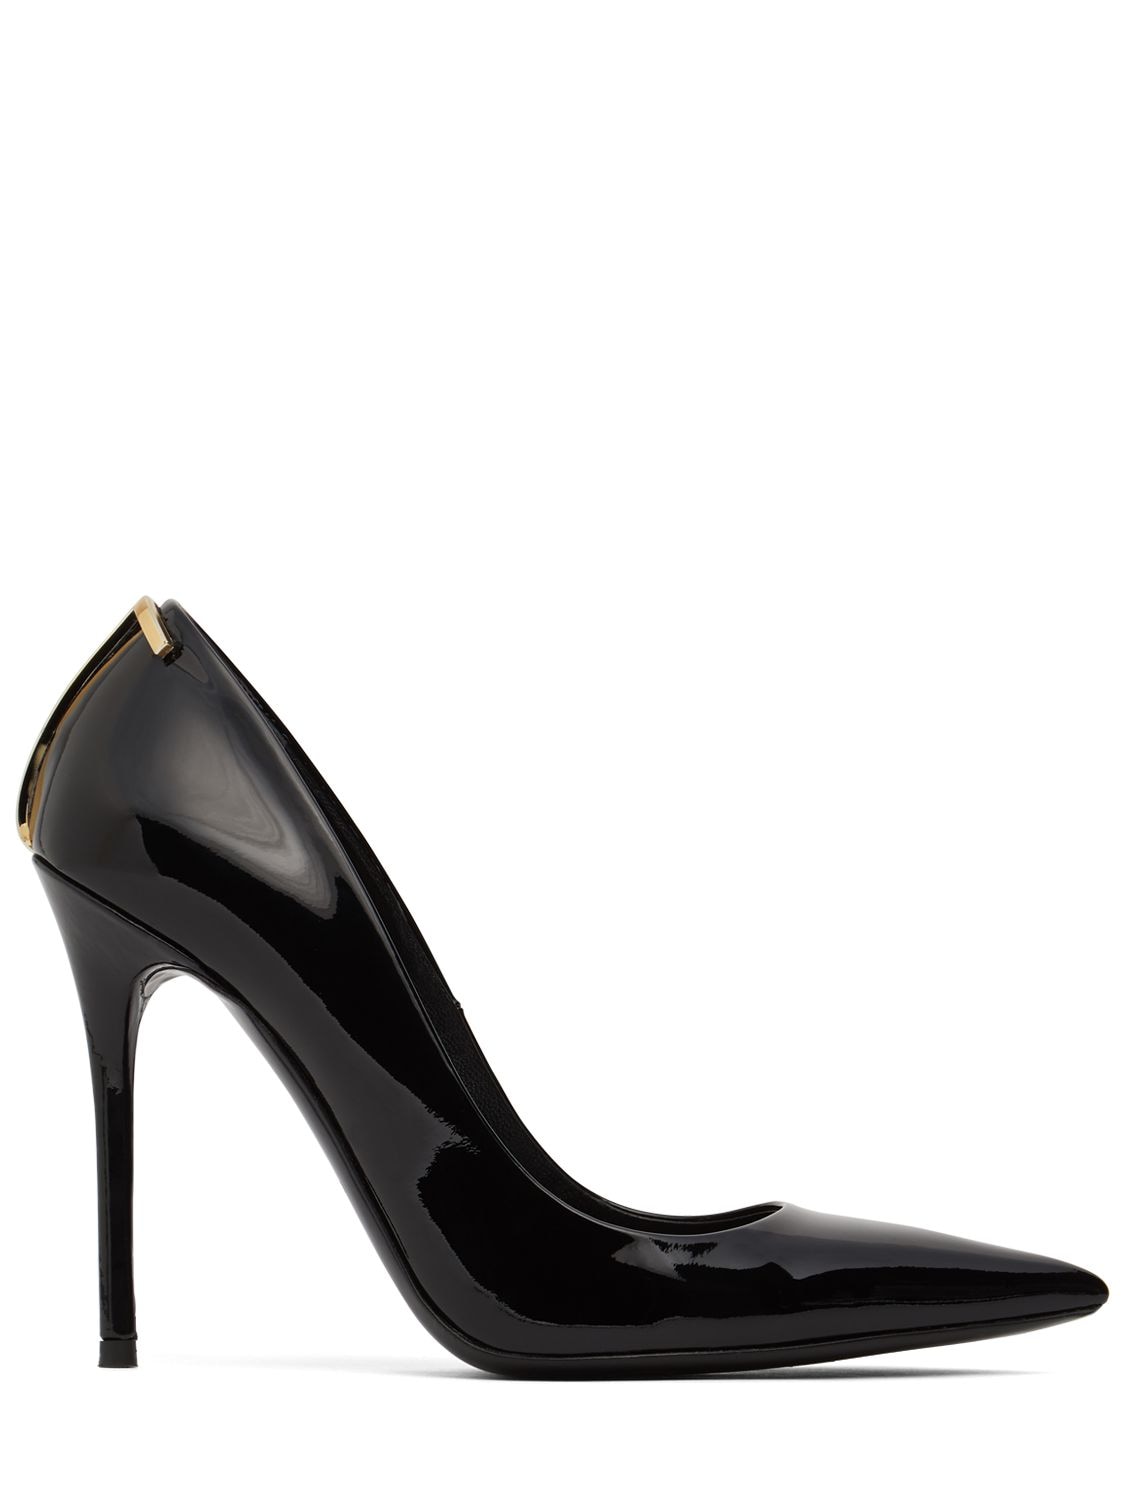 TOM FORD 105mm Iconic T Patent Leather Pumps